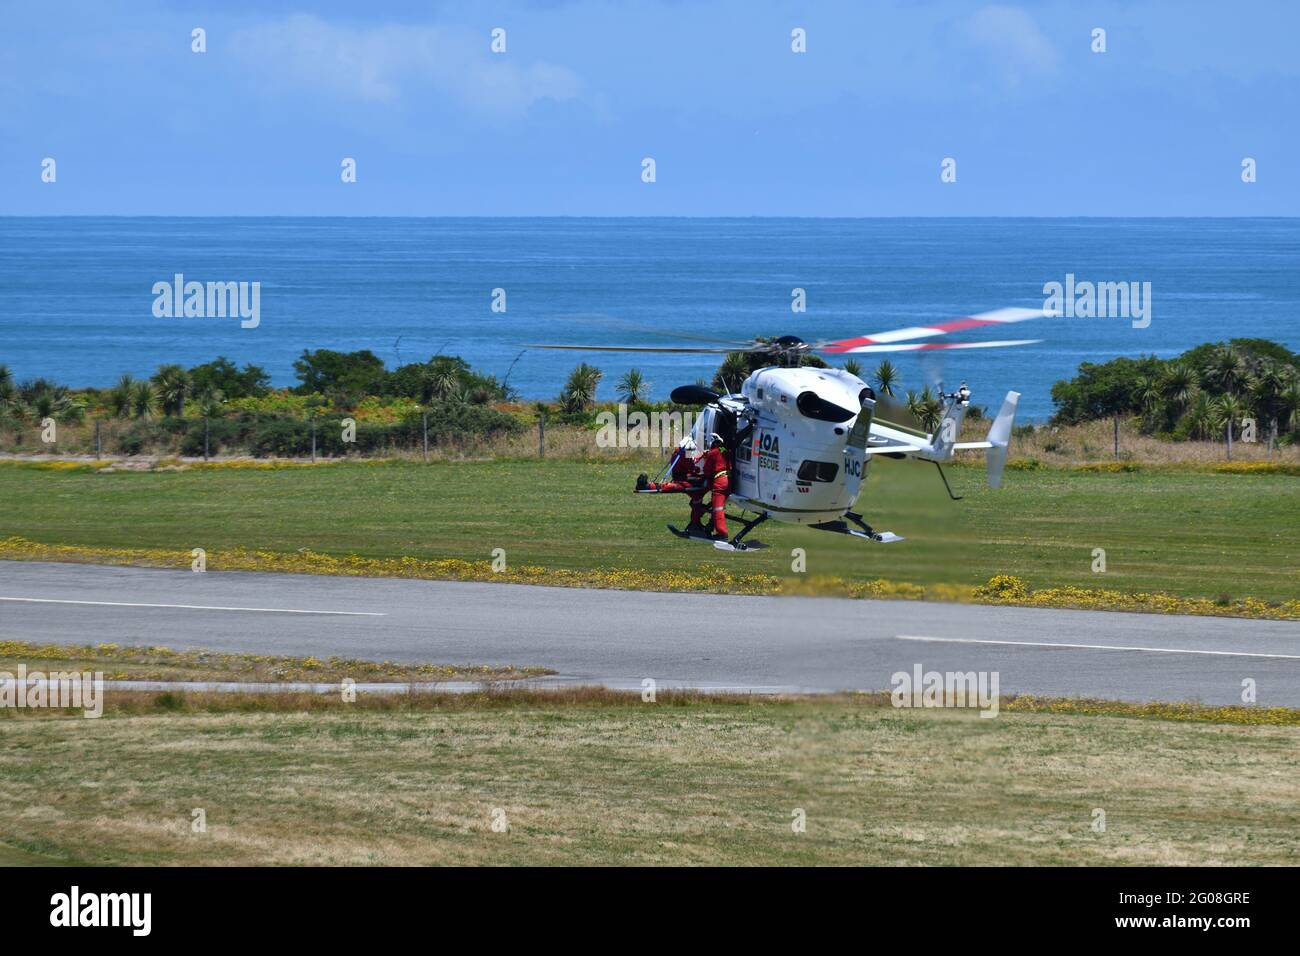 GREYMOUTH, NEW ZEALAND, JANUARY 15, 2021: A rescue helicopter and crew practice rescue operations at the Greymouth airport Stock Photo